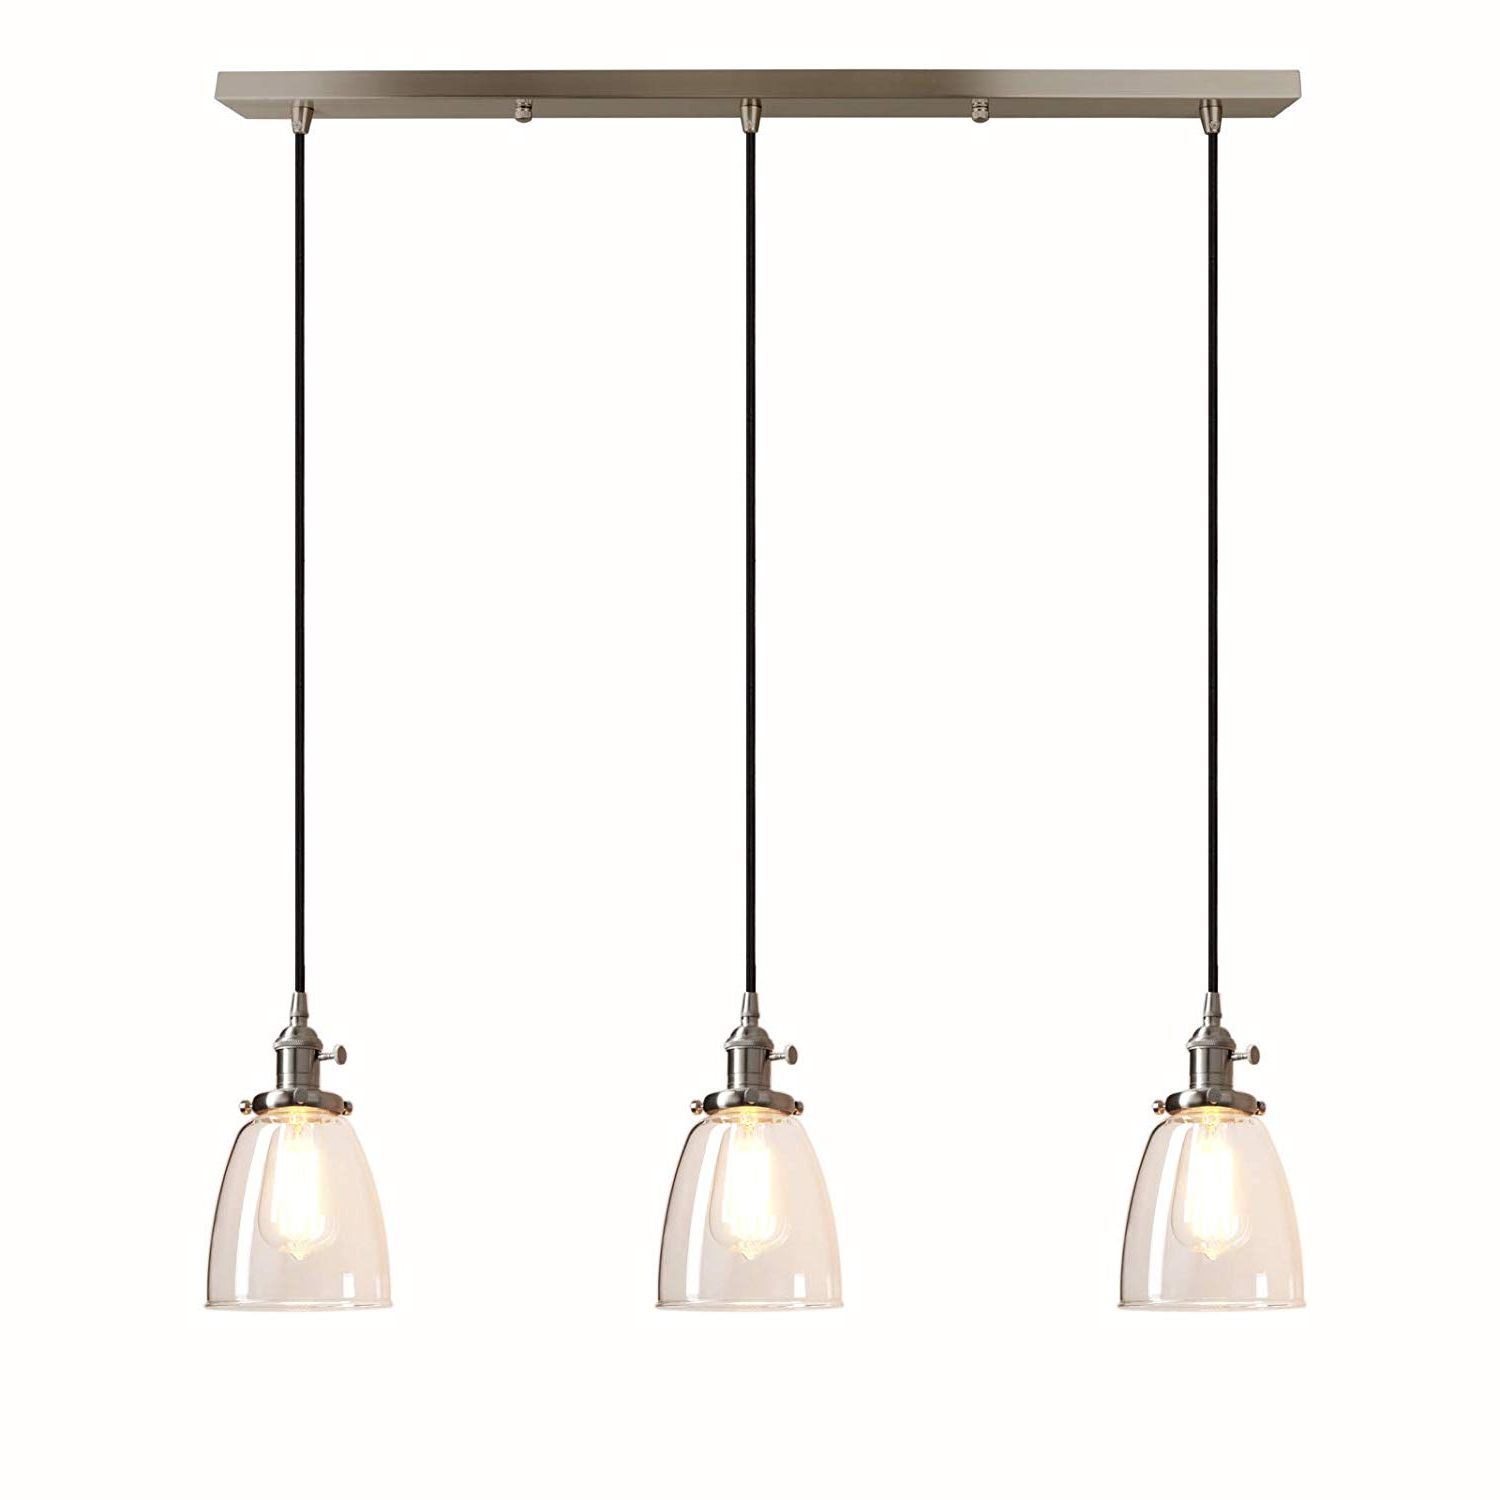 Pathson Industrial 3 Light Pendant Lighting Kitchen Island Hanging Lamps  With Oval Clear Glass Shade Chandelier Ceiling Light Fixture (brushed Steel) Pertaining To Preferred Bautista 6 Light Kitchen Island Bulb Pendants (View 13 of 25)